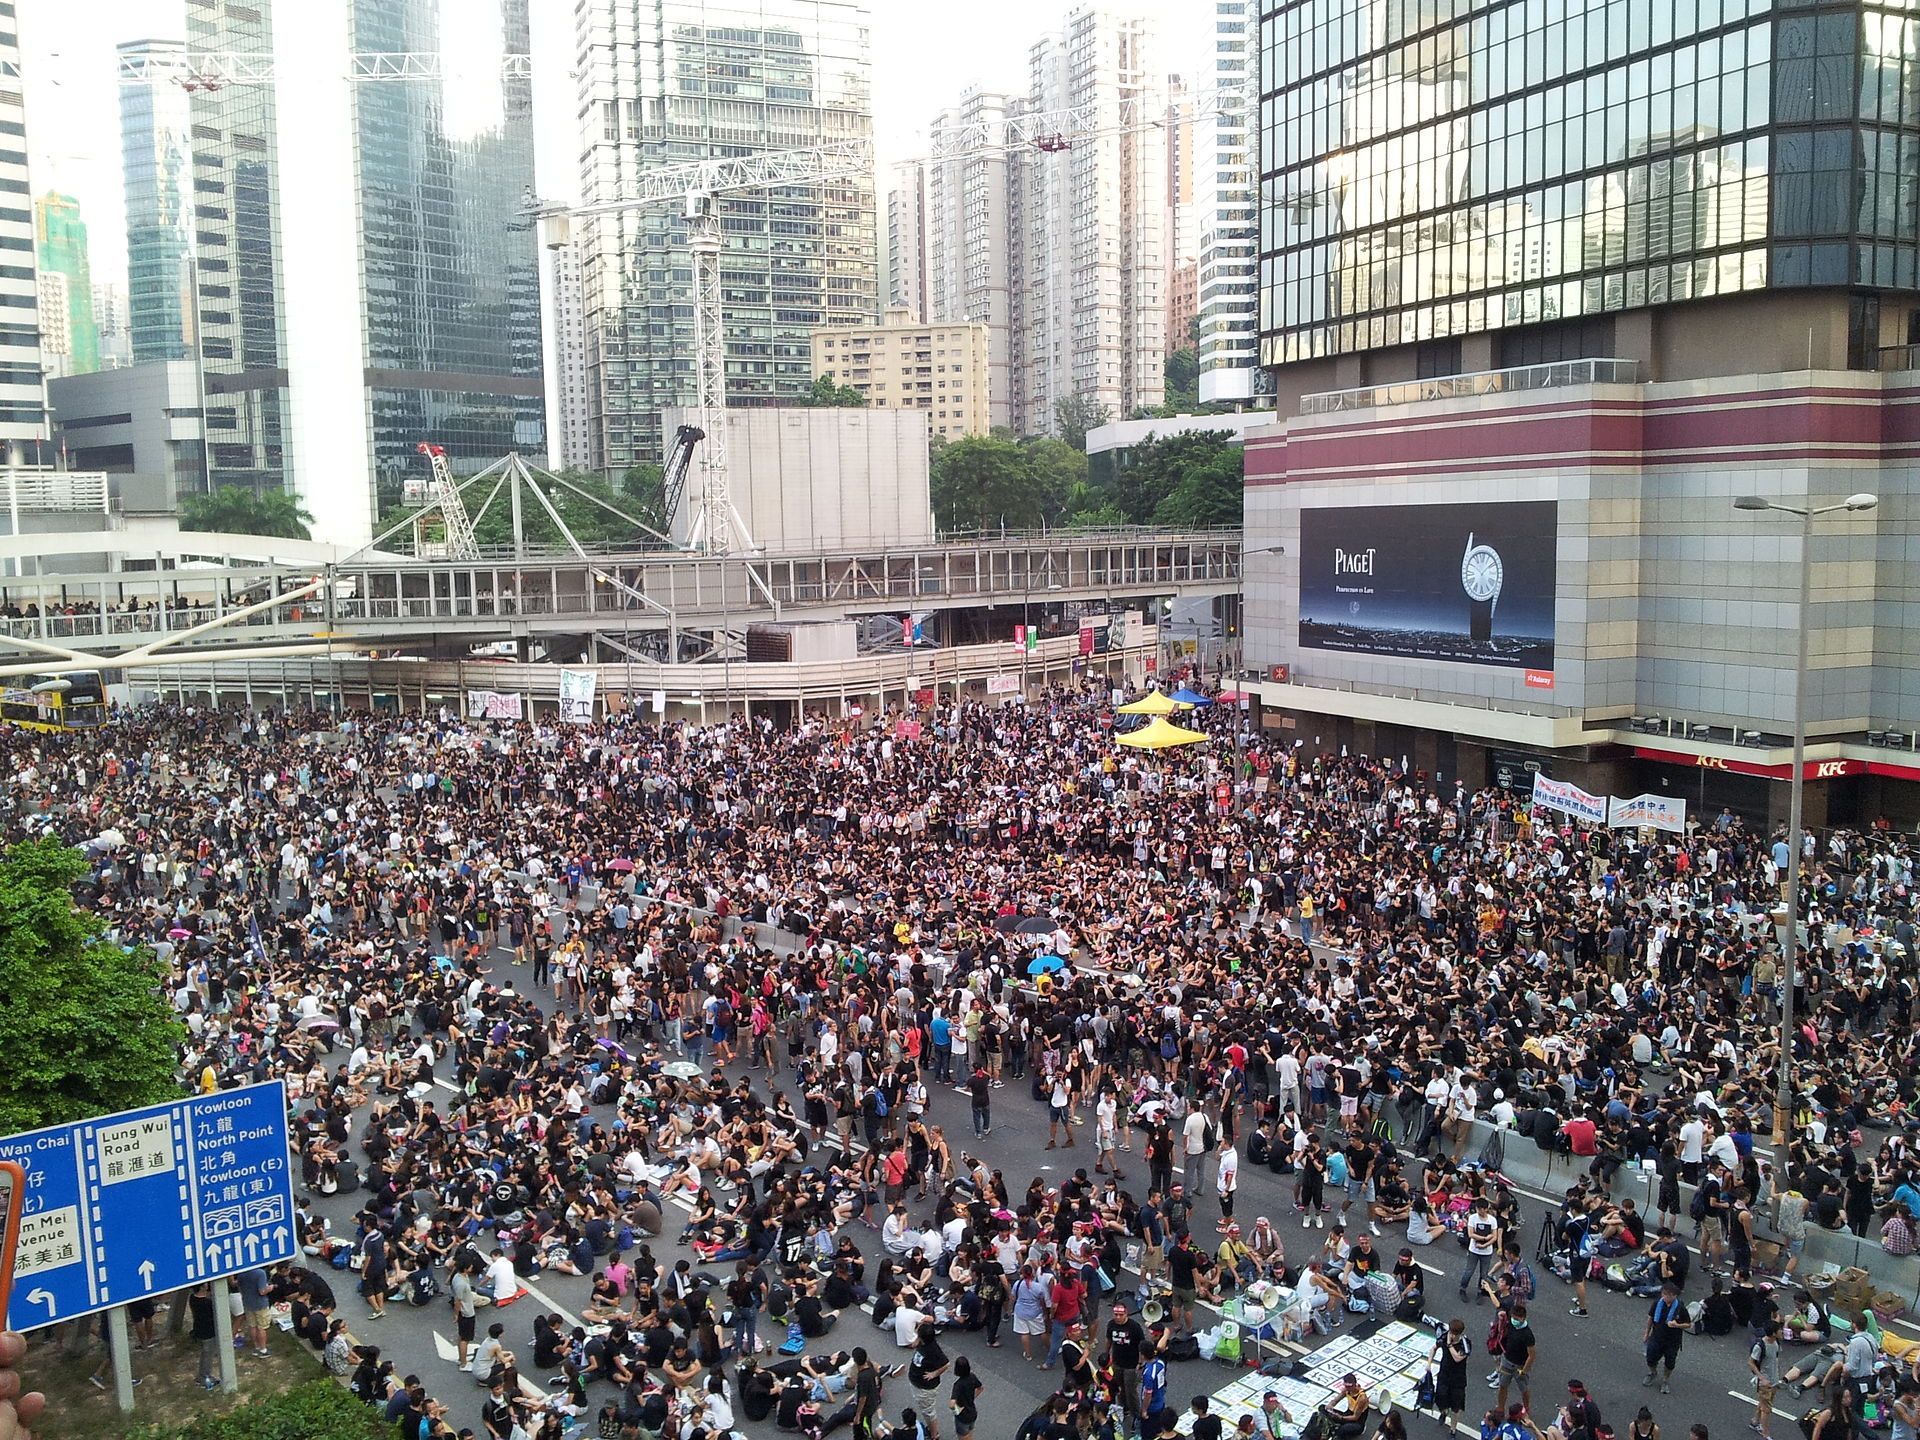 From Occupy Wall Street to Occupy Central: The Case of Hong Kong